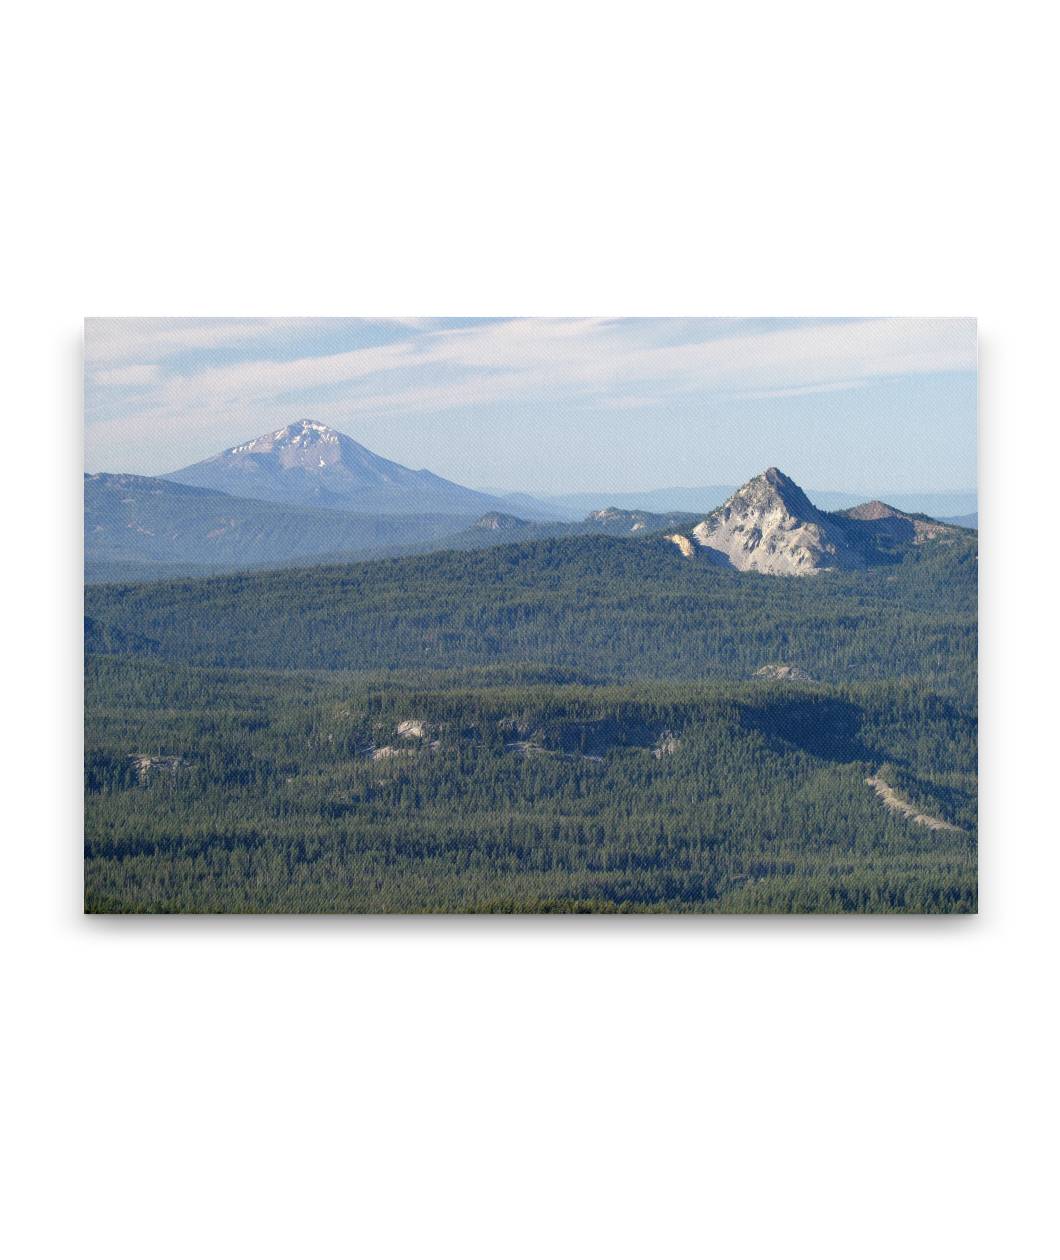 Union Peak (right) and Mount McLoughlin, Crater Lake National Park, Oregon